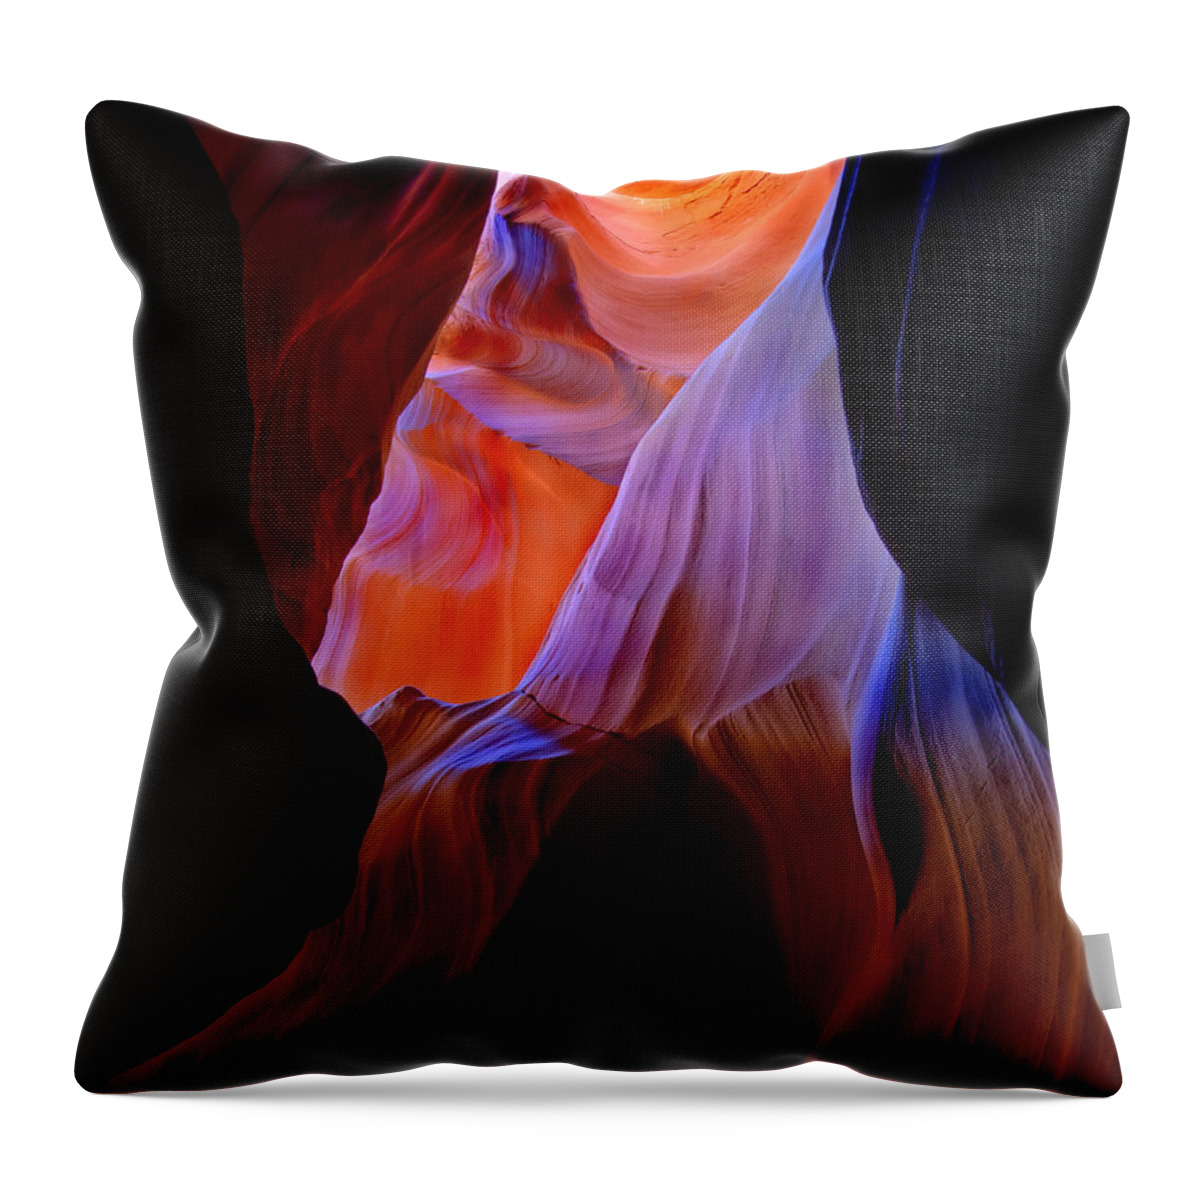 Canyon Throw Pillow featuring the photograph Bottled Light by Michael Dawson